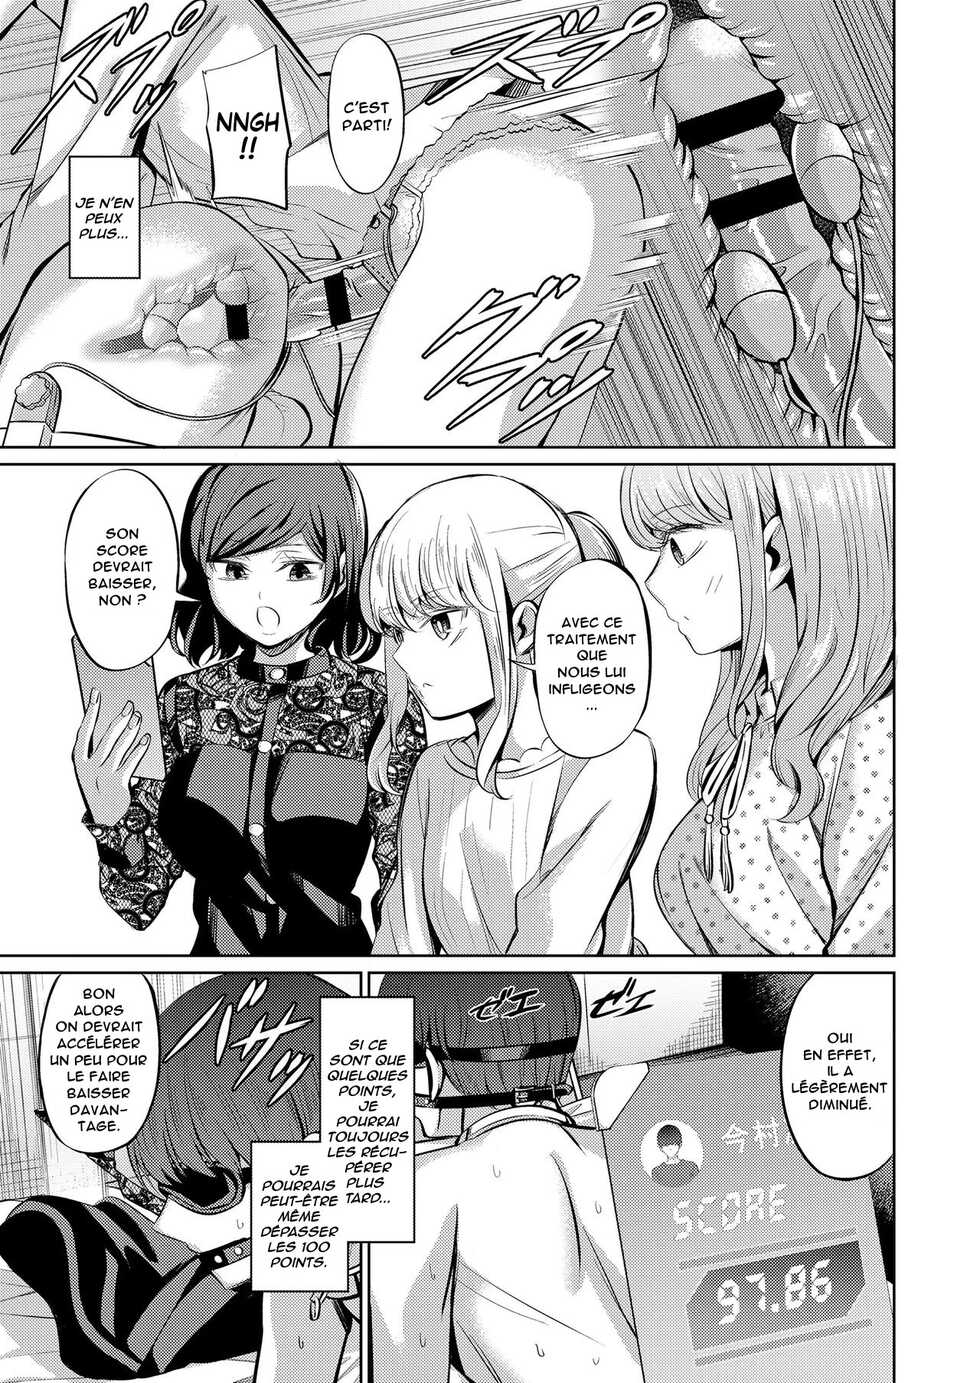 [Yamahata Rian] Tensuushugi no Kuni | A Country Based on Point System (Girls forM Vol. 20) [French] [Anatoh] [Digital] - Page 27